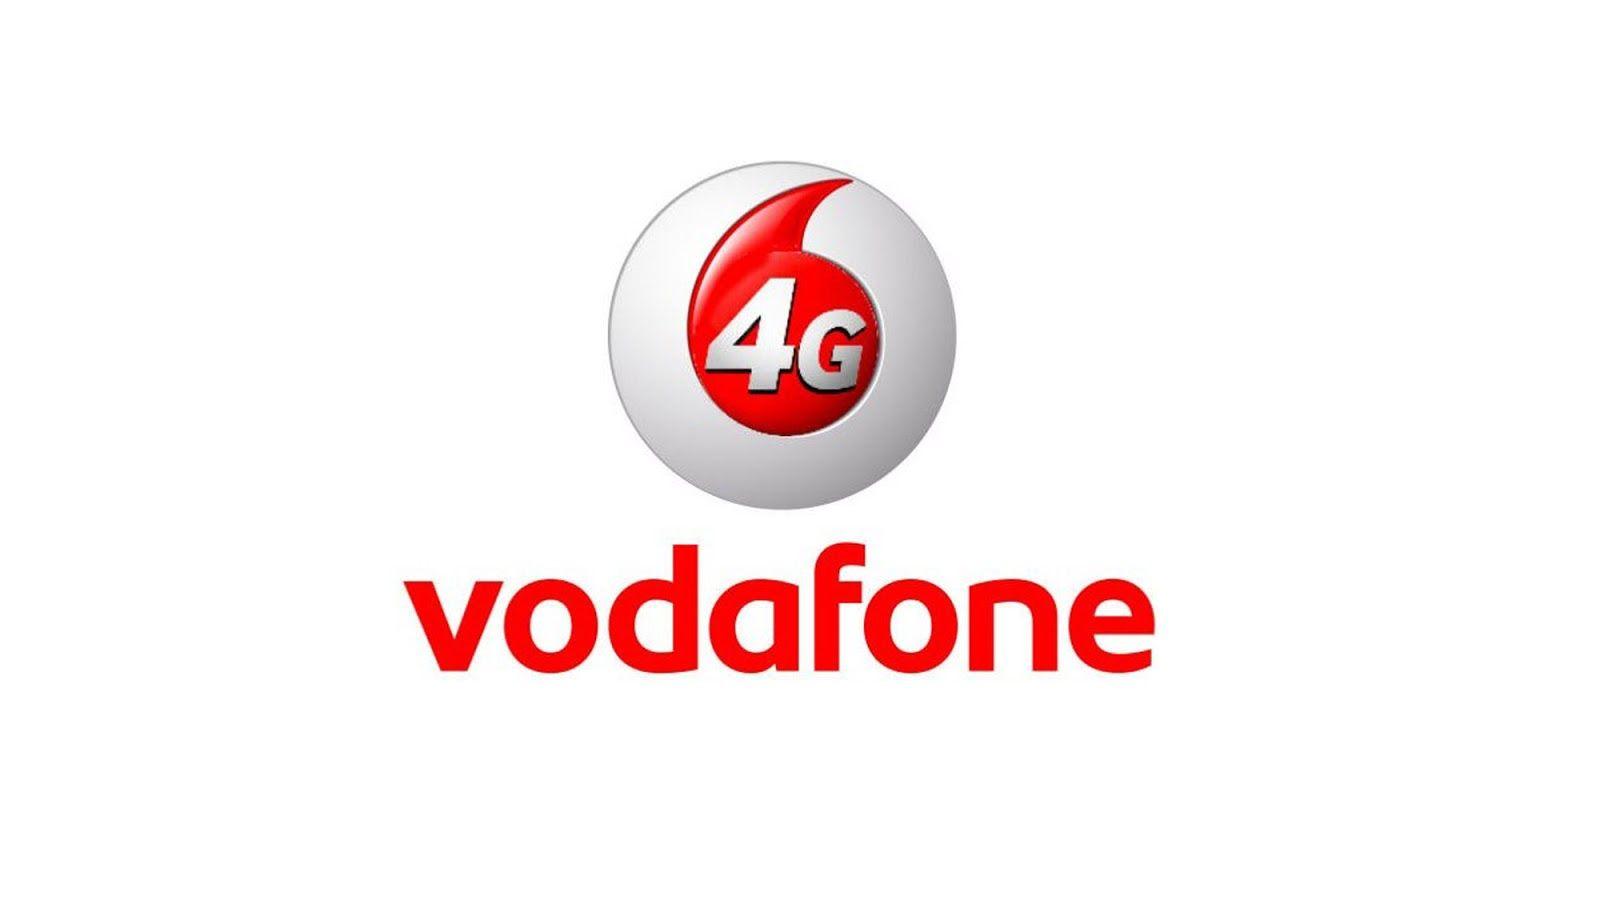 Vodafone and Google partnered to jointly develop data services